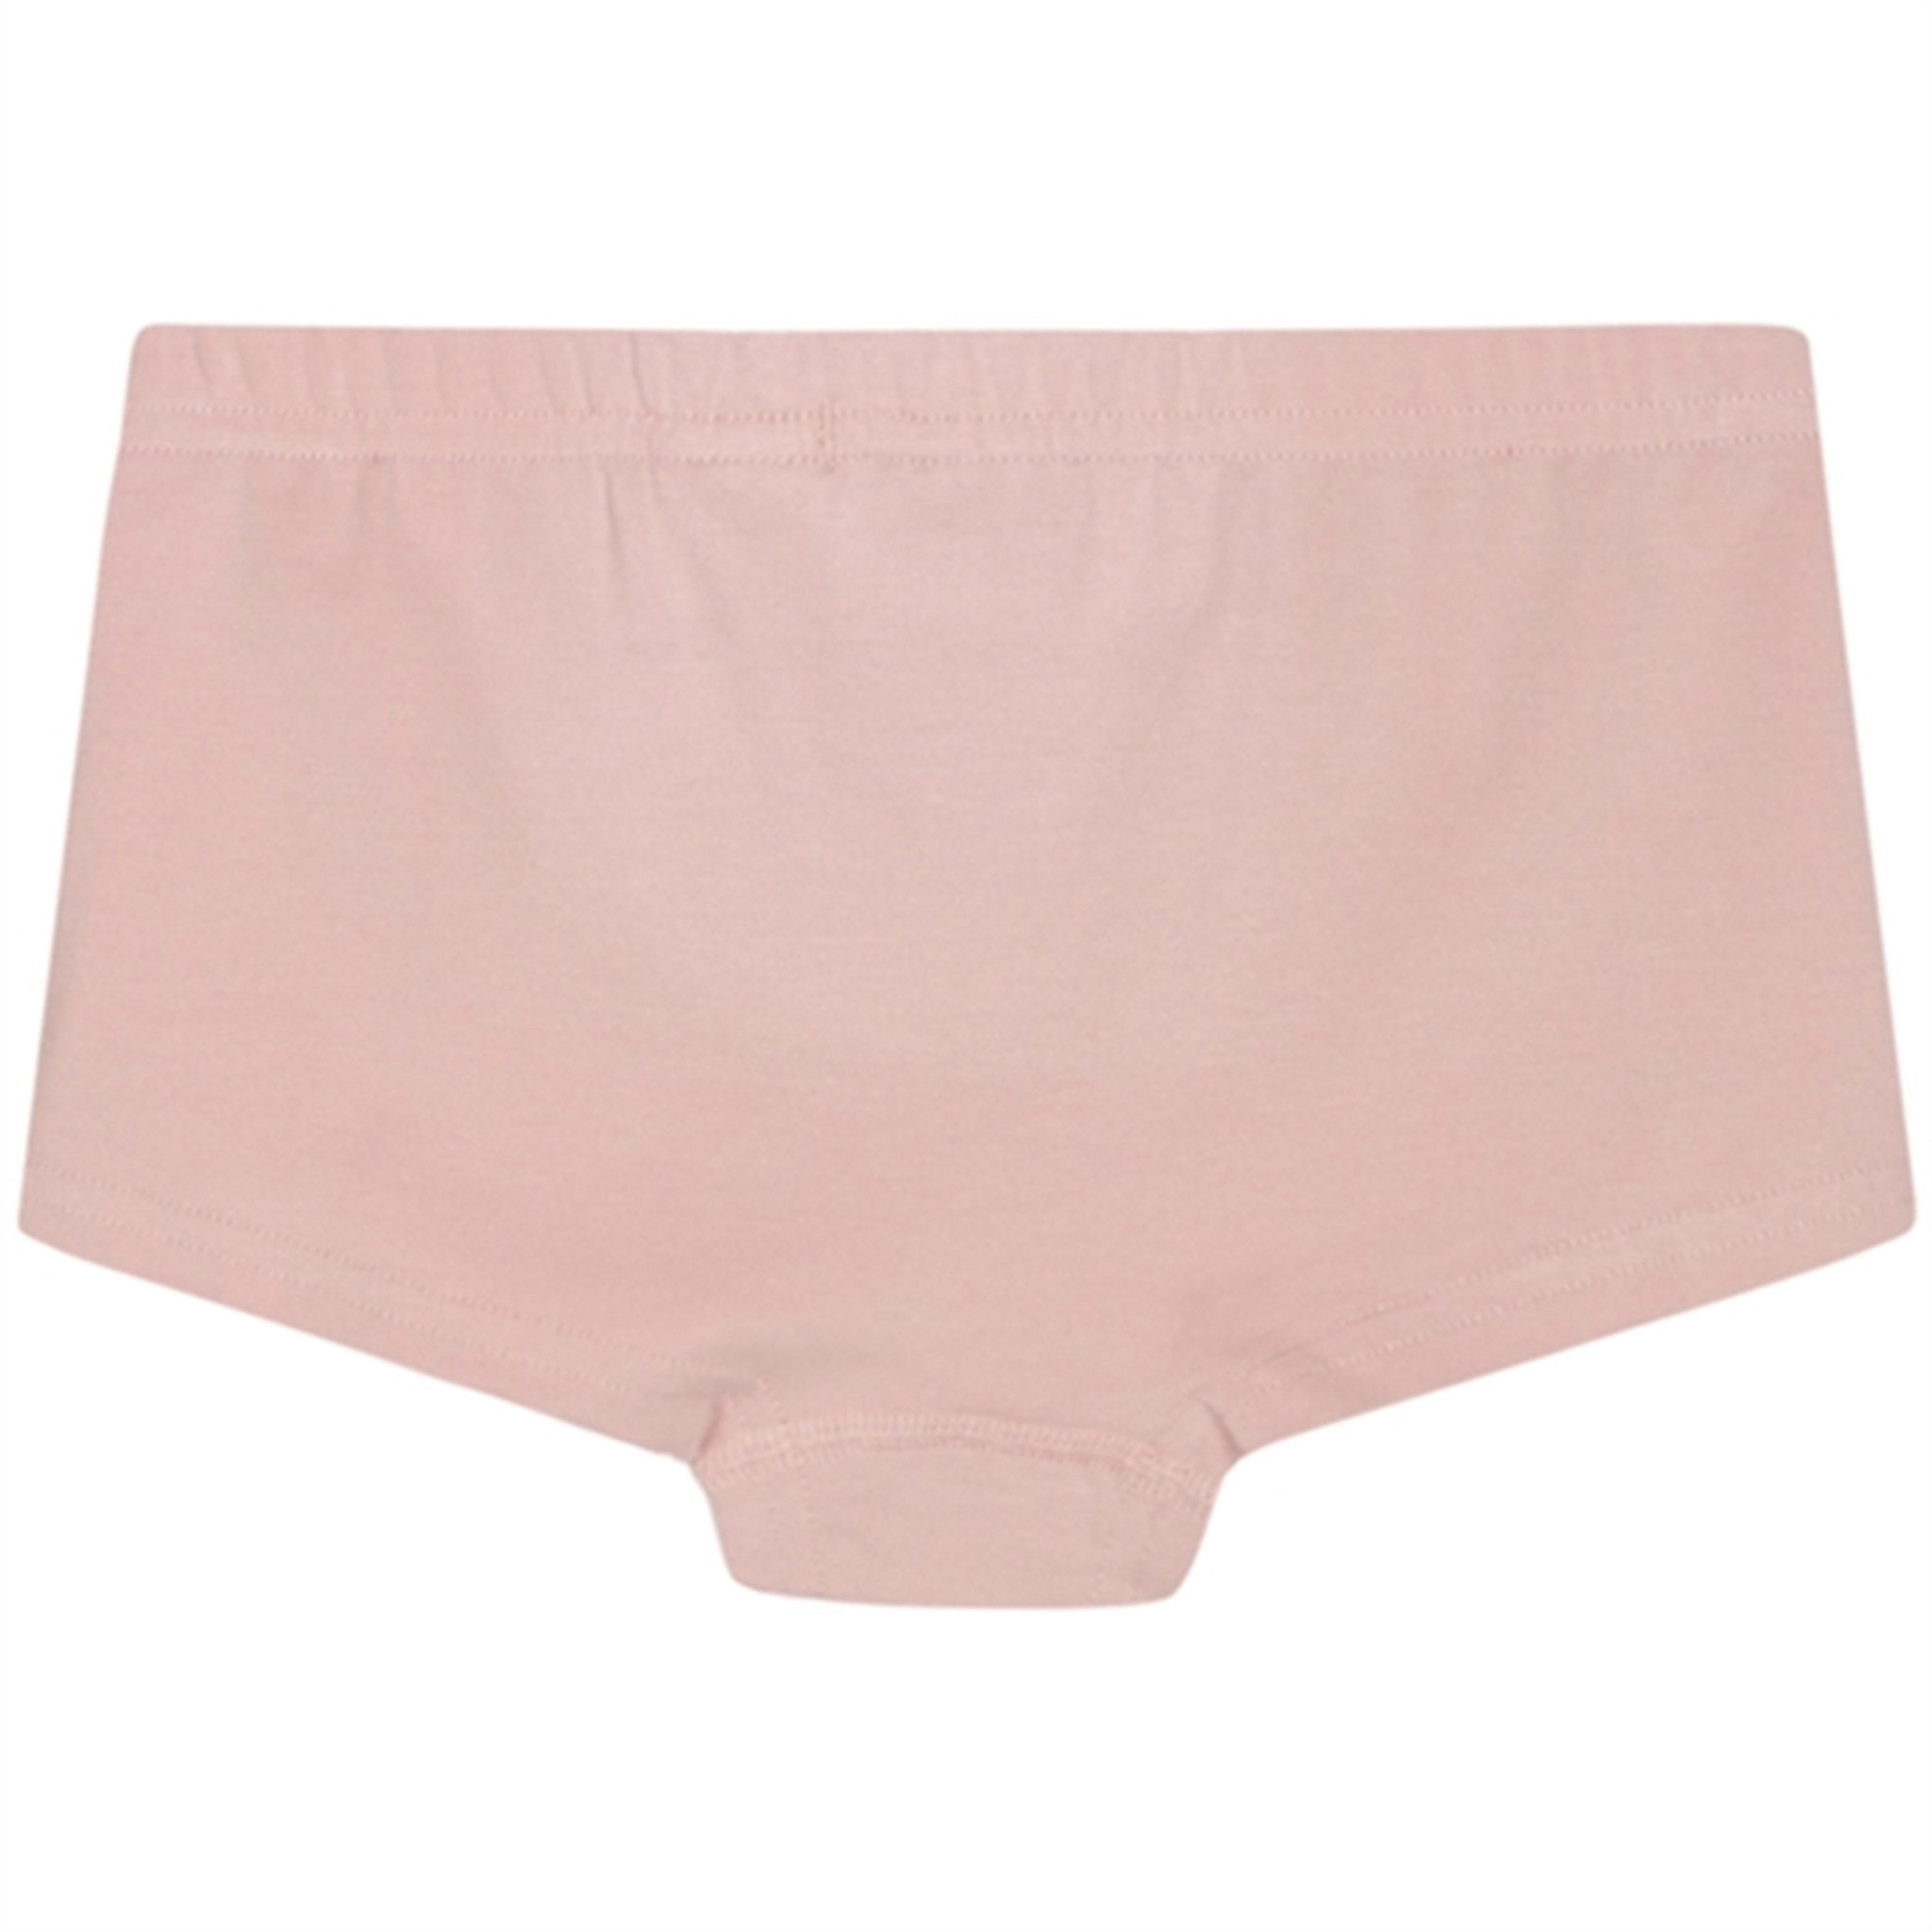 Hust & Claire Dusty Rose Fria Underwear 2-pack 2